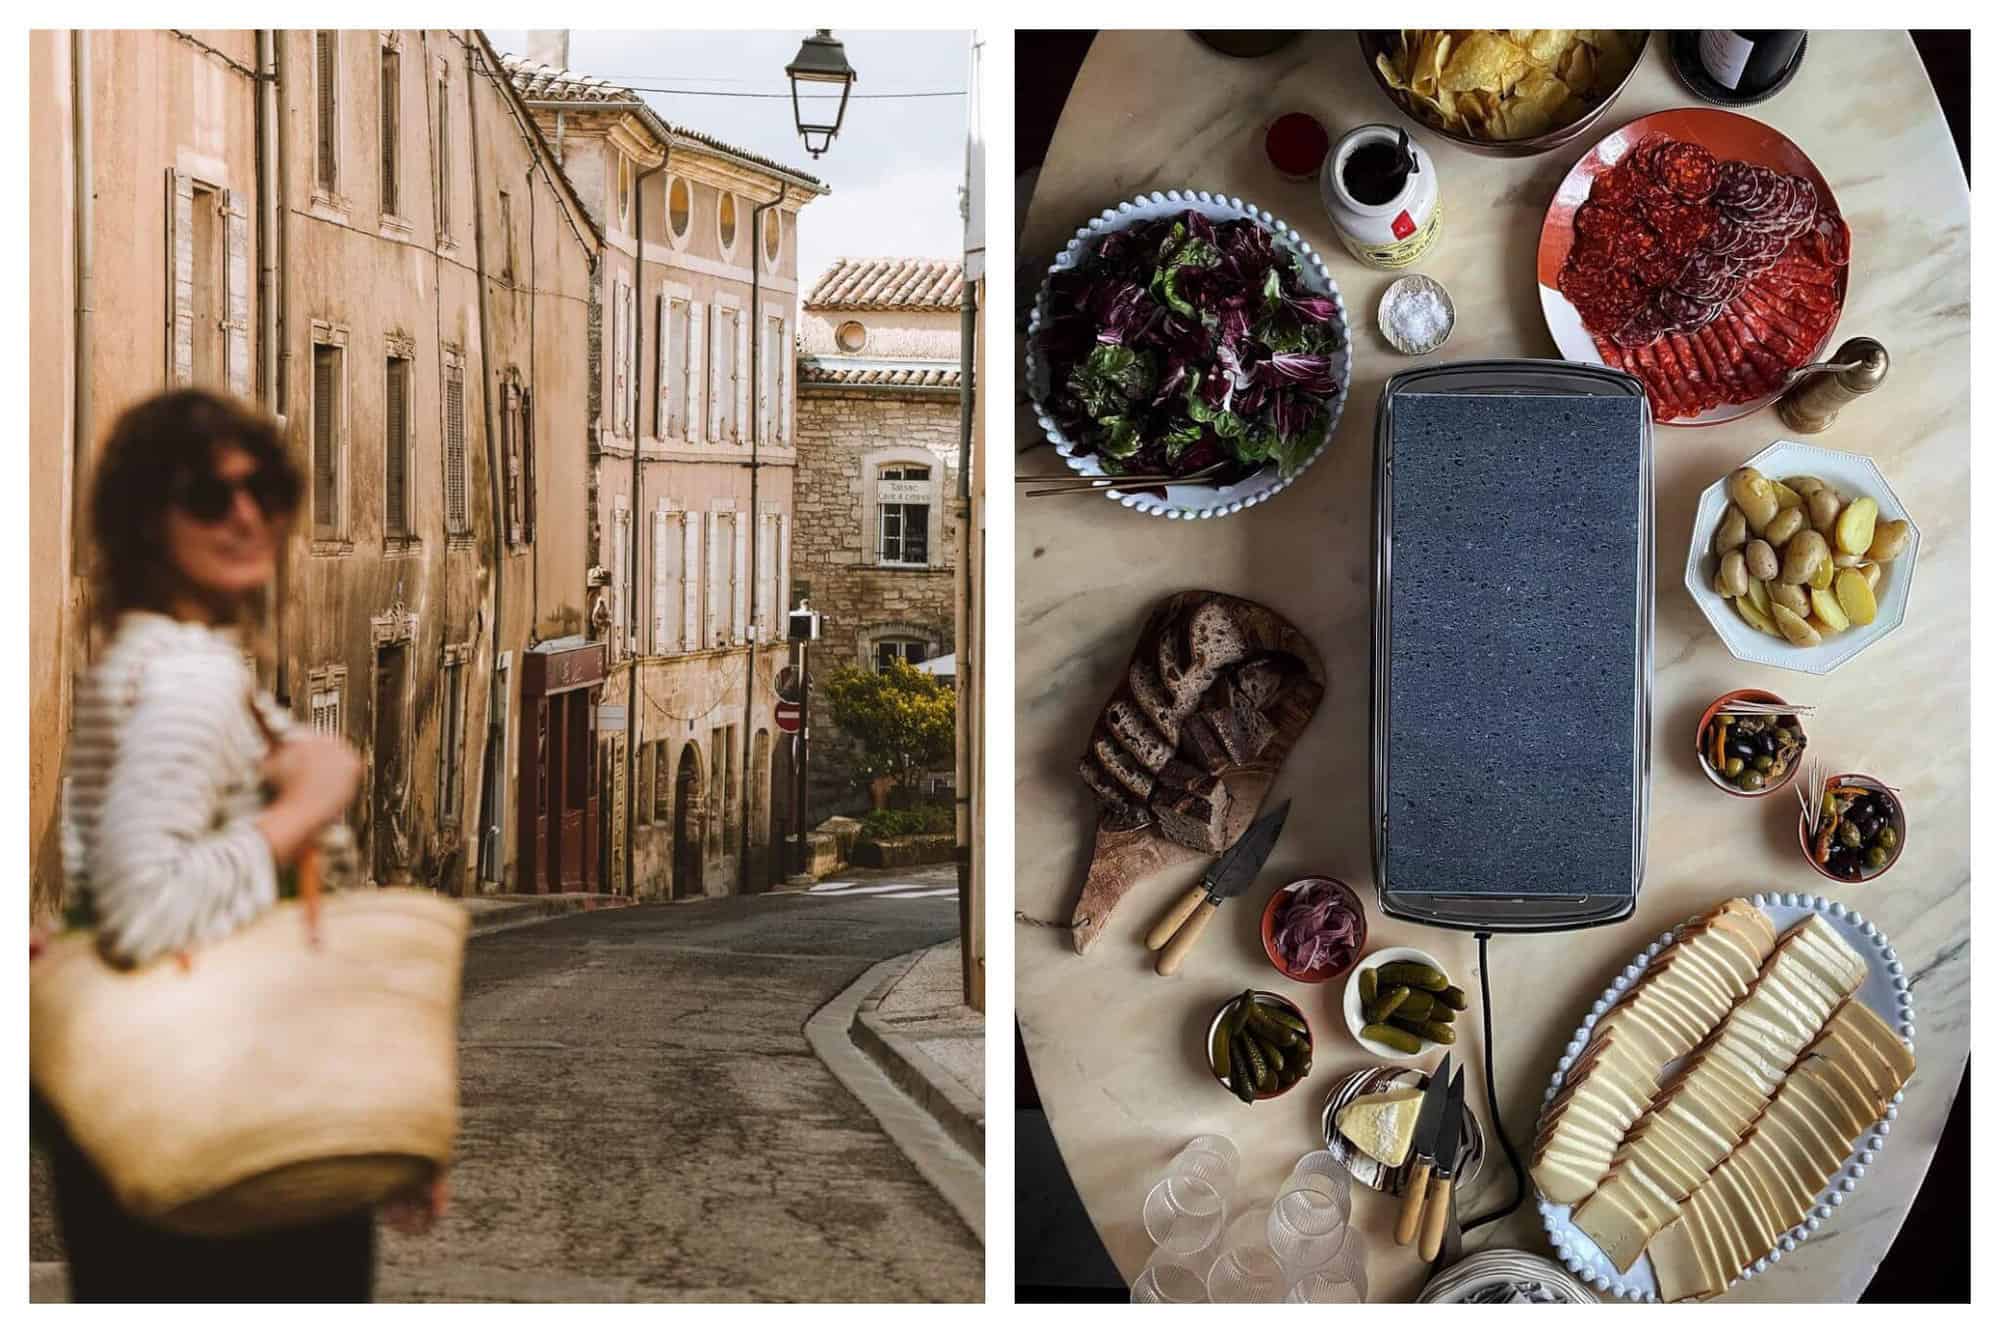  The author Rebekah Peppler walking through the old town of Bonnieux, Provence-Alpes-Côte d'Azur. A table spread with ingredients around a raclette grill.